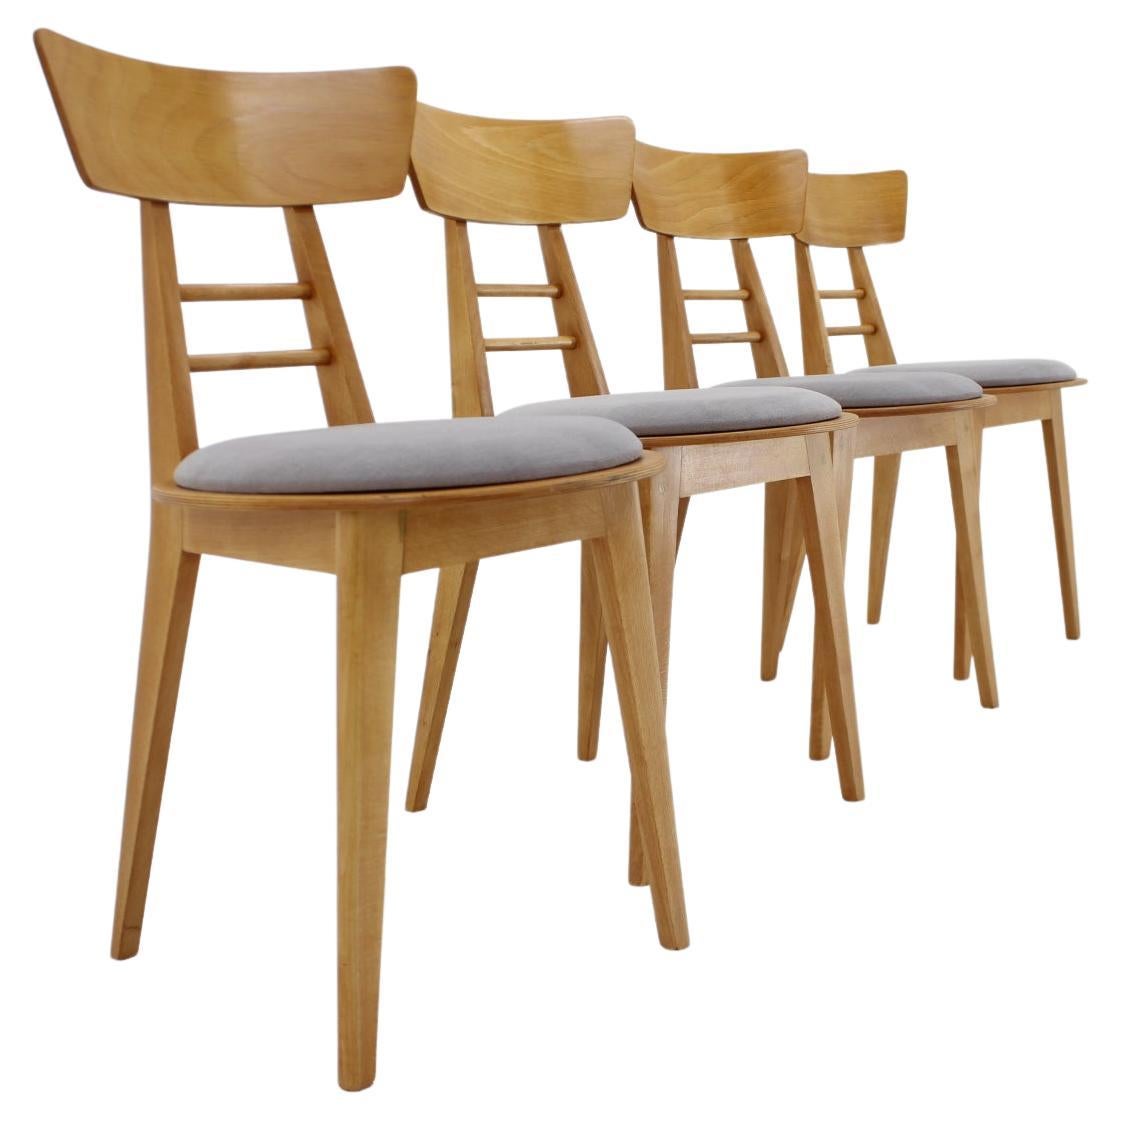 1980s Set of Four Dining Chairs by Ton, Czechoslovakia